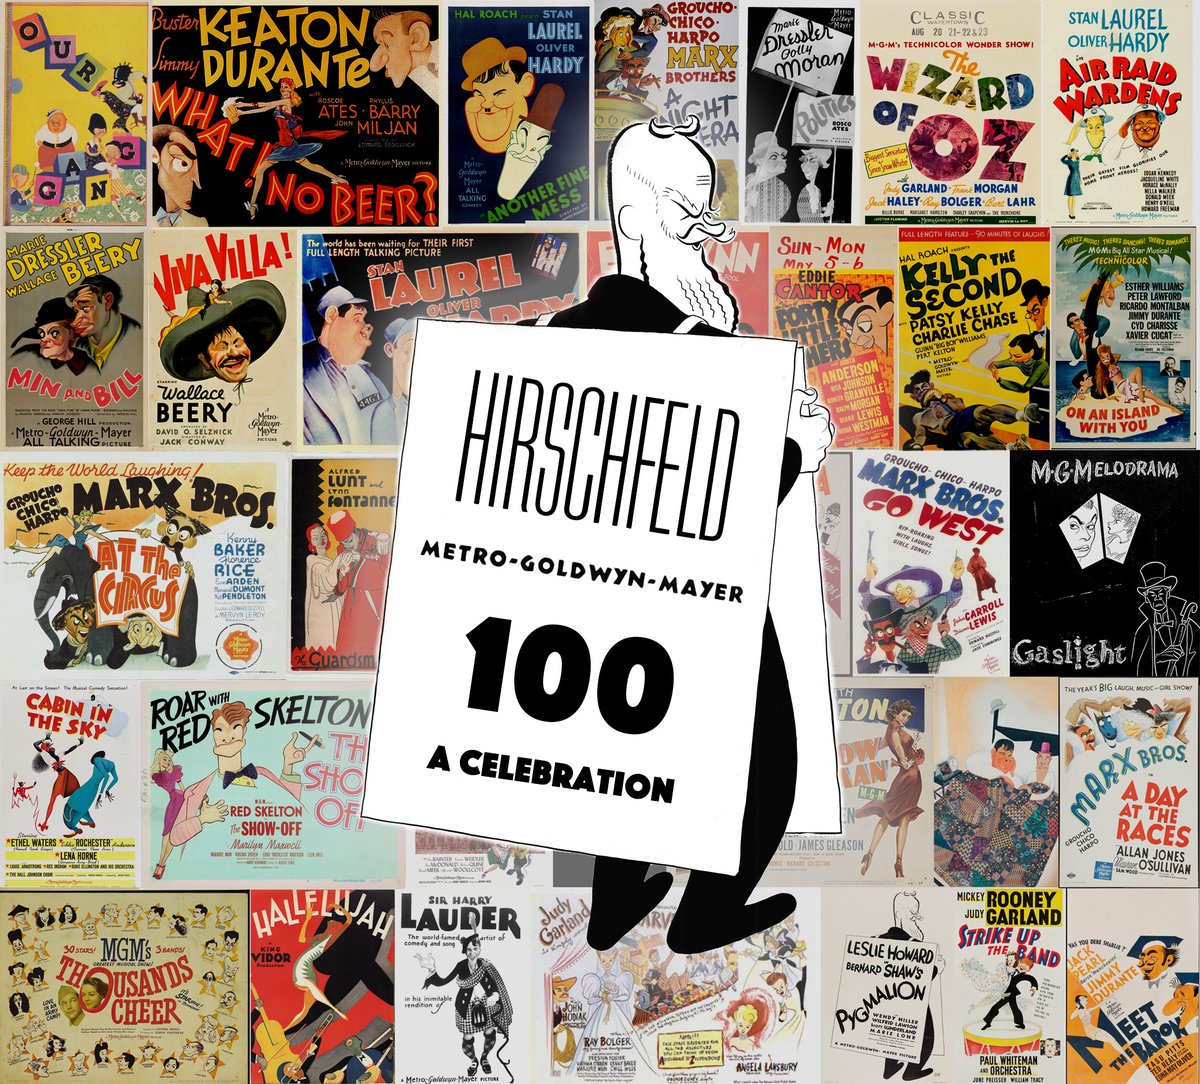 Happy 100th Anniversary to MGM! Hirschfeld created hundreds of posters, drawings, and other works for the studio for over 40 years! Follow along throughout the day as we look back at just a few of his many works with MGM and look out for a special announcement! #MGM100